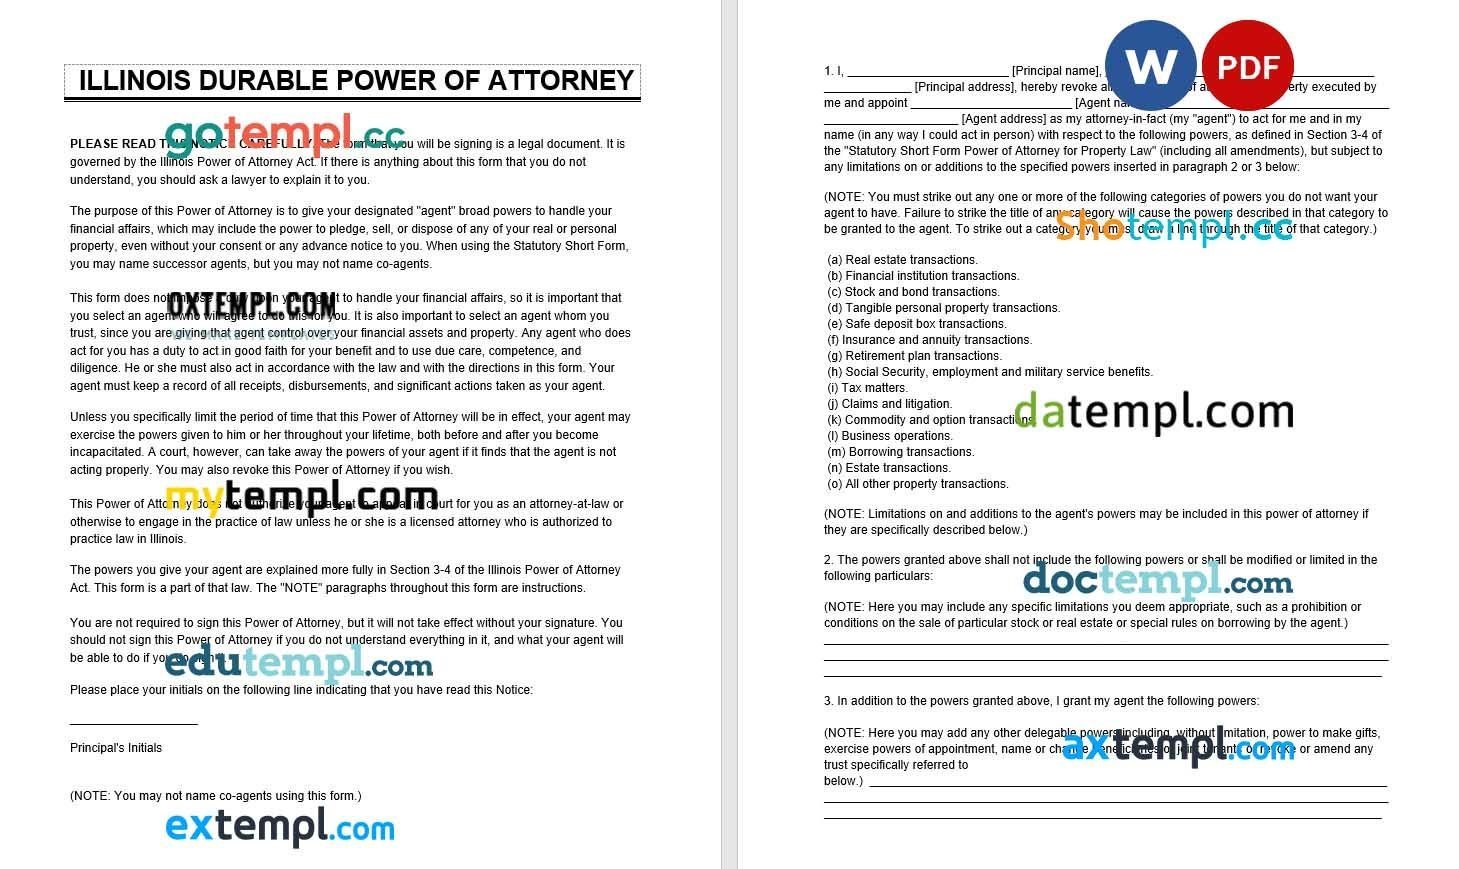 Illinois Durable Power of Attorney example, fully editable